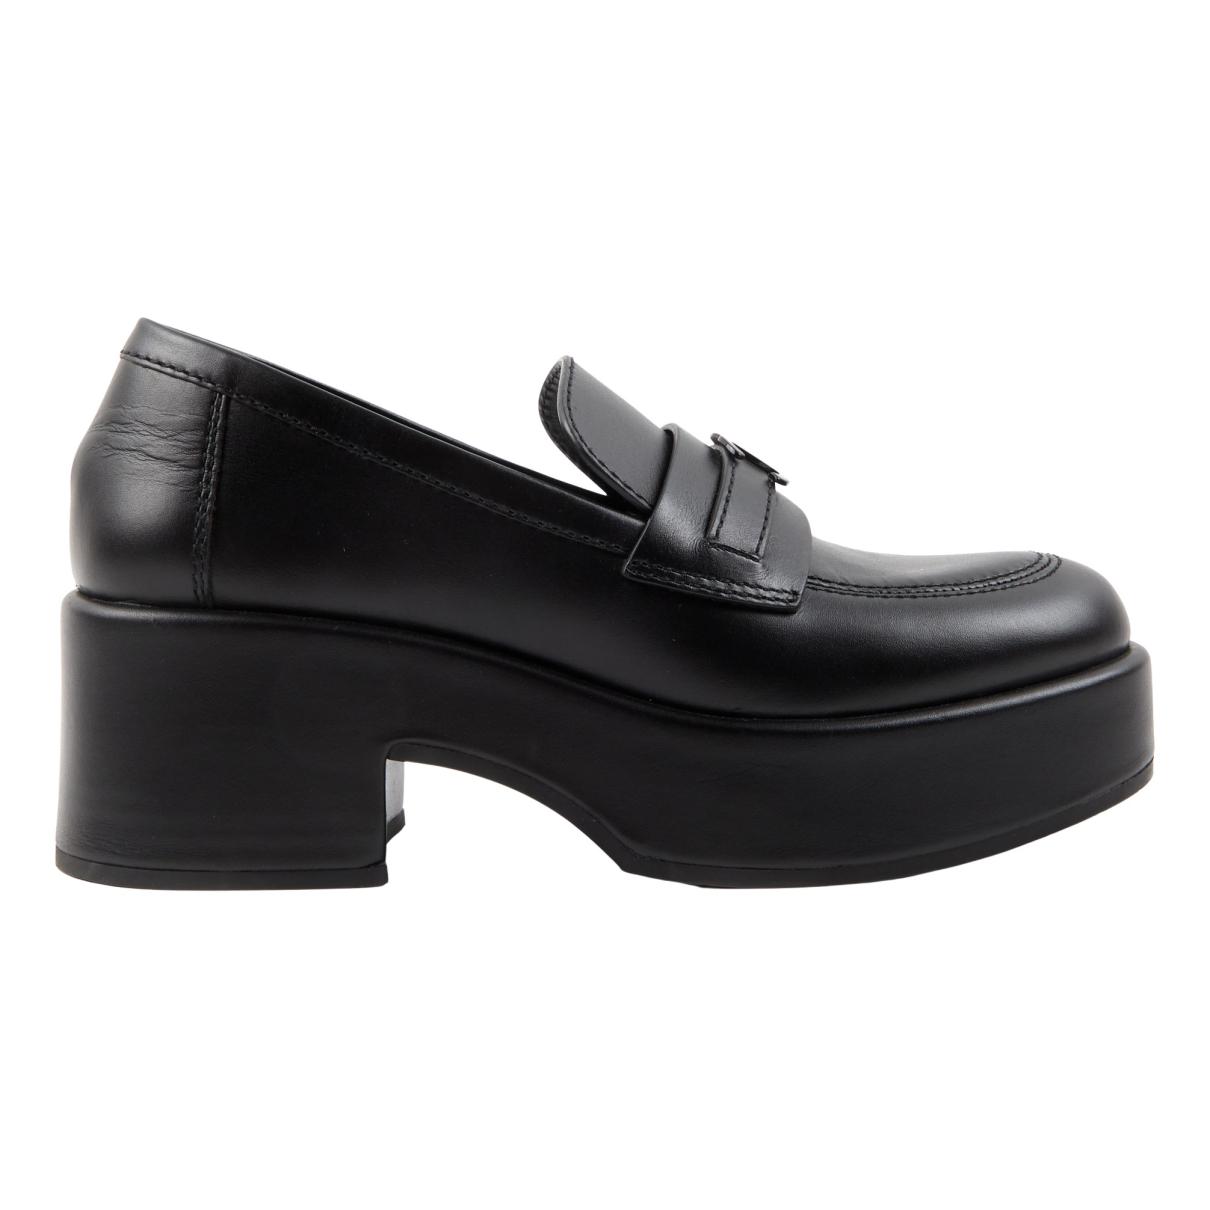 Leather flats Chanel Black size 36.5 EU in Leather - 31266507